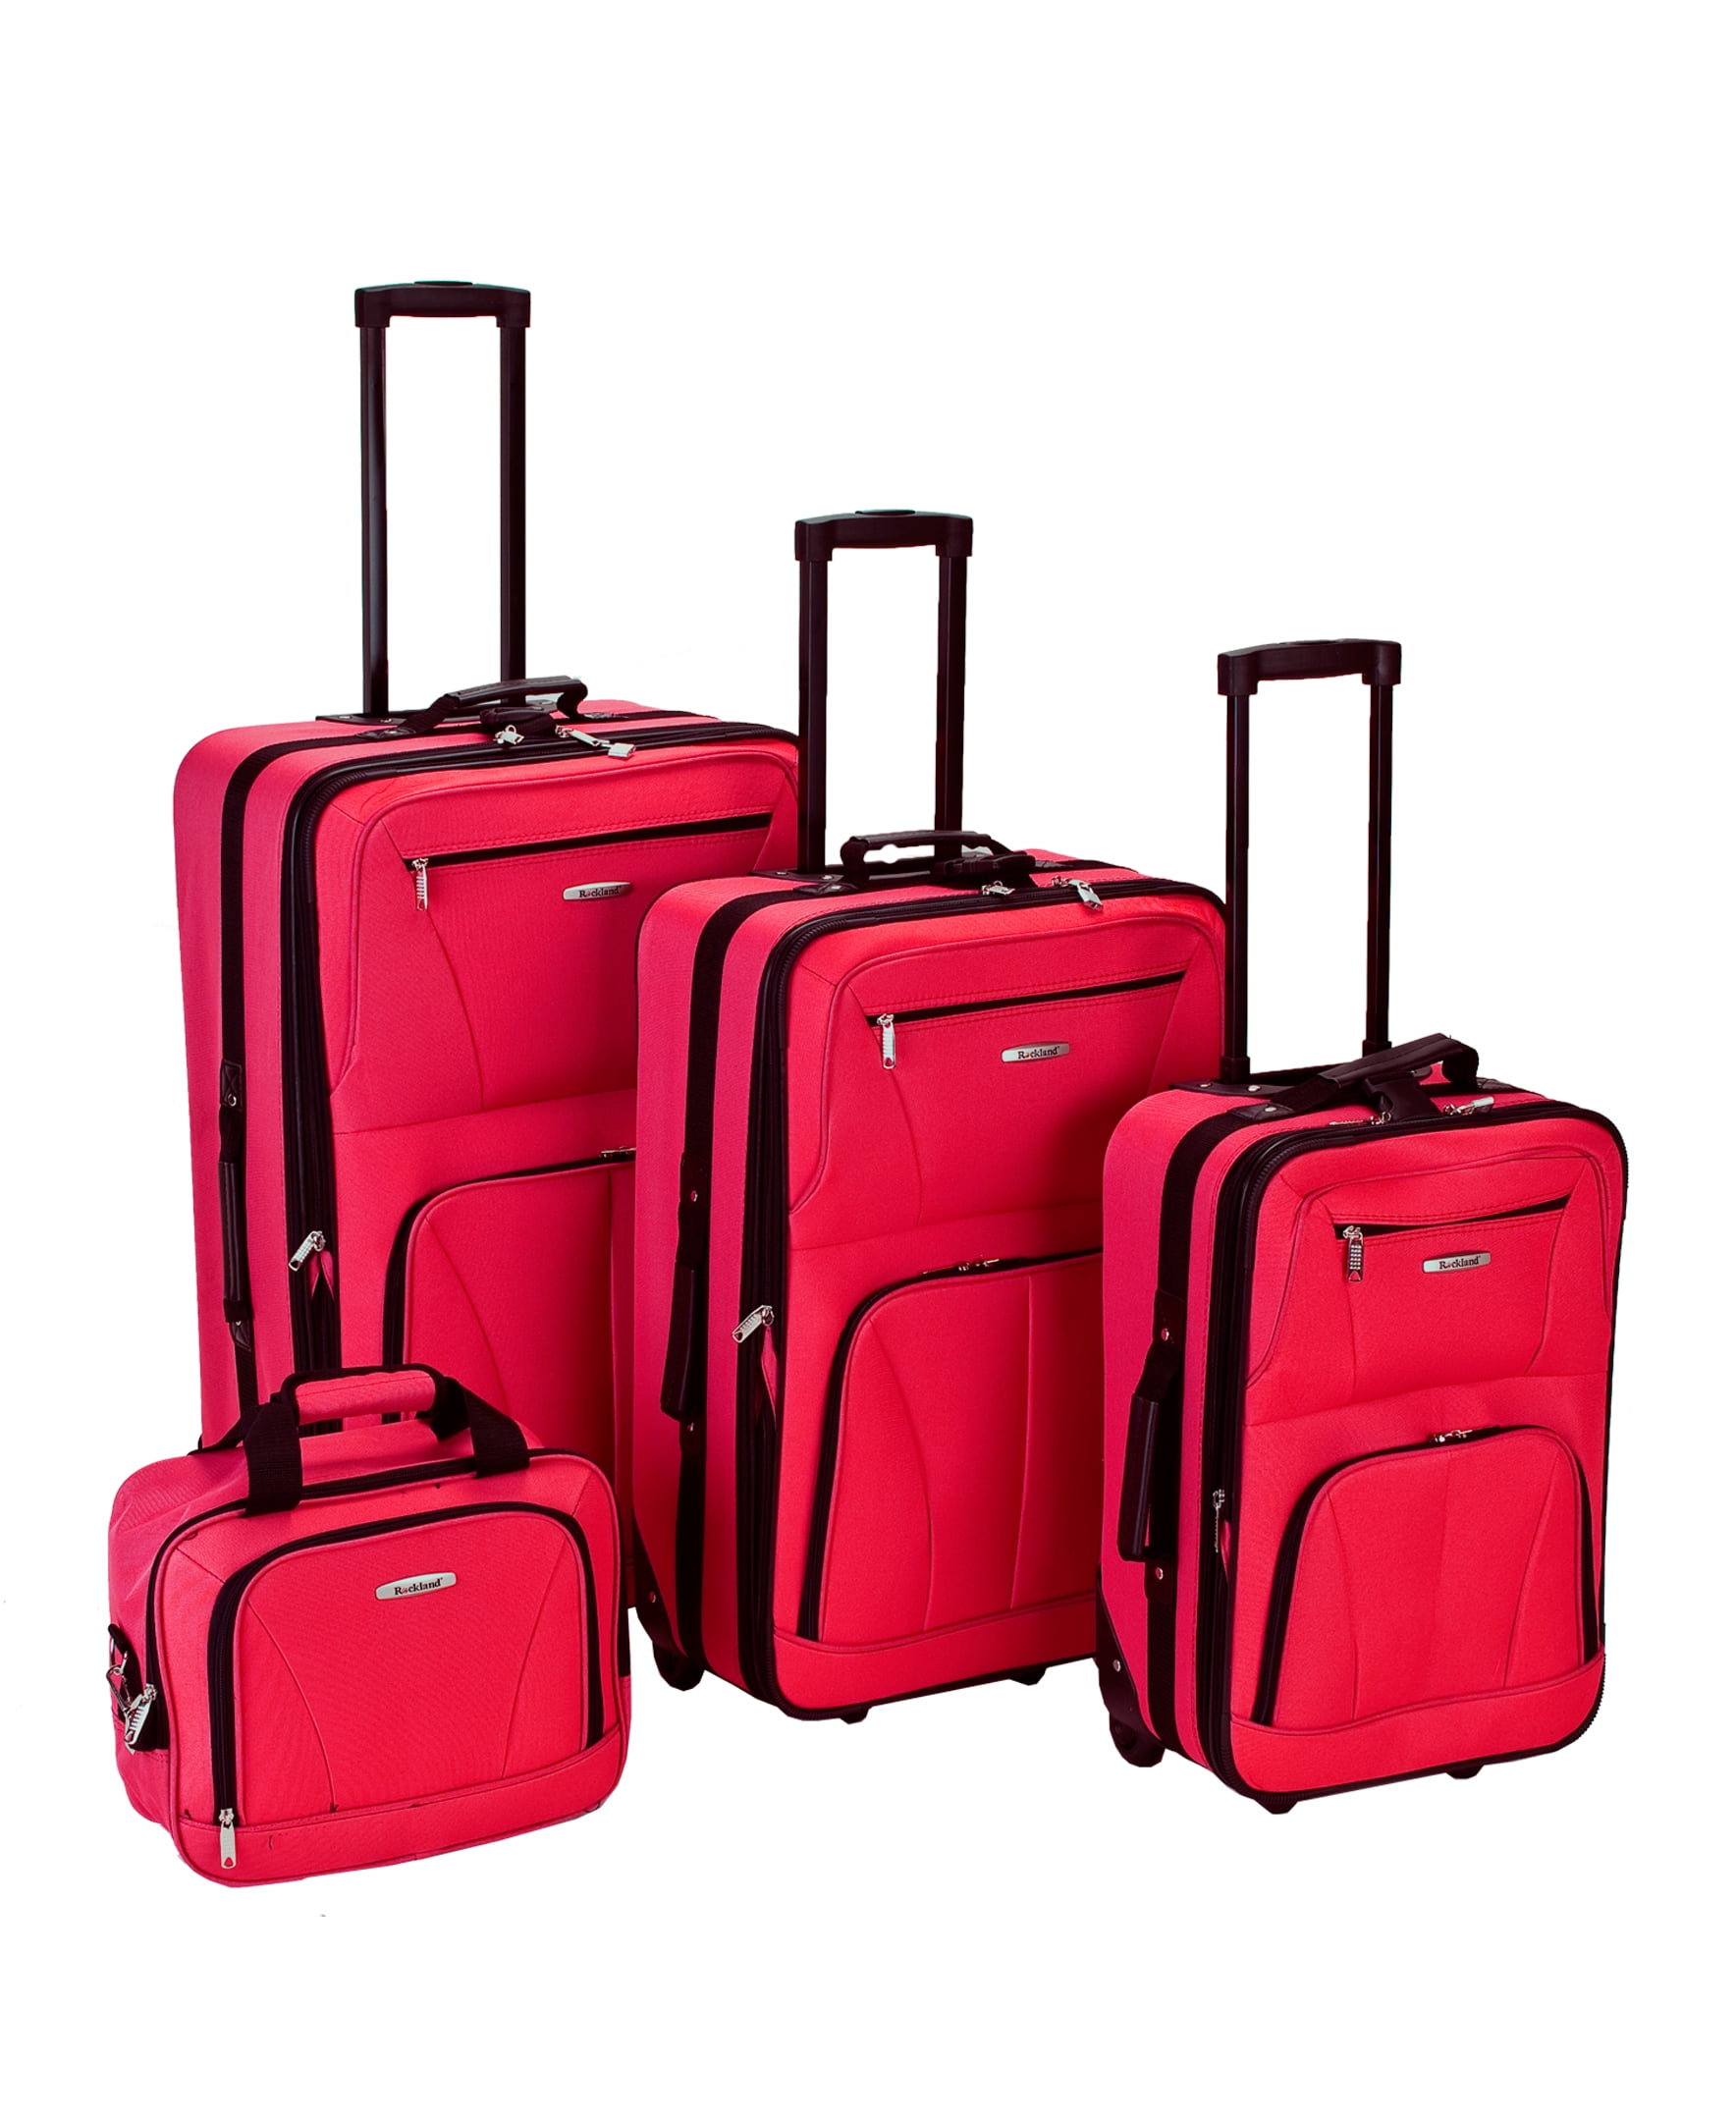 rockland journey luggage reviews